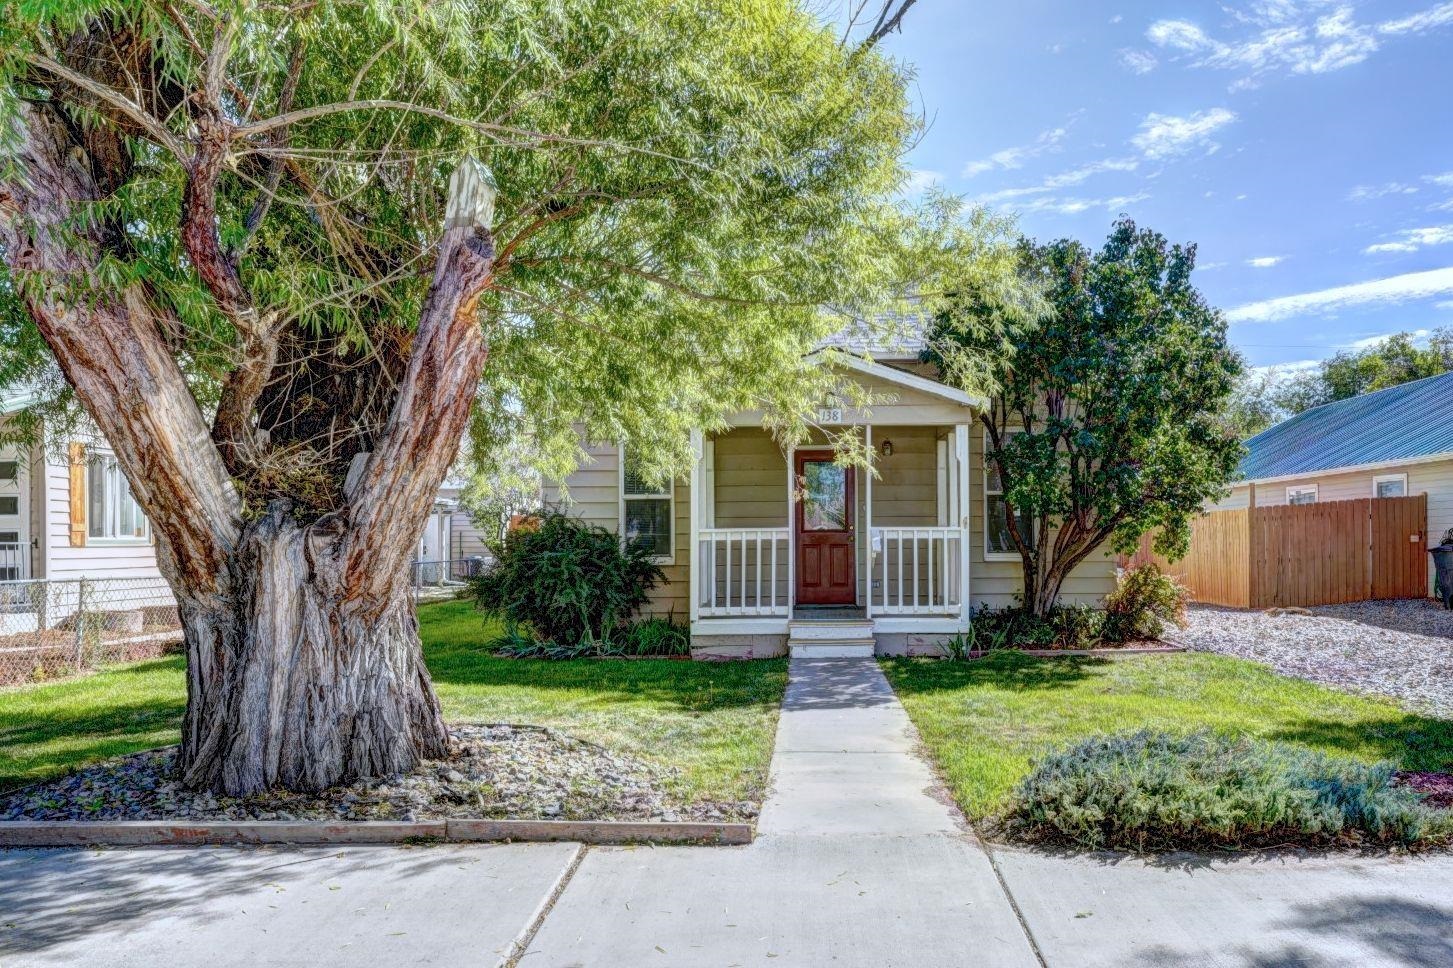 Wonderful location in downtown Fruita! Worried about parking, don't be! Plenty of parking with driveway in front, street parking and ample parking + RV parking off the alley. Hop, Skip, Jump, Walk or Ride to all the FUN found in Fruita. Landscape includes mature trees and bushes, blackberries, strawberries and room for a garden. Fully fenced back yard with a great storage shed. Sprinkler system front & back. Sit on your covered front porch, relax and people watch. Built in 1906 home has stood the test of time. 1248 sq.ft. 2 bedrooms on the main level, full bath on the main level (jacuzzi tub). Living, kitchen/dining and laundry on the main level as well. 3rd bedroom ( non-conforming) or office upstairs. With an acceptable offer, Seller is offering a $7,000.00 credit towards roof, closing costs, interest rate buy-down or a combination of those. Home and carpets have been professionally cleaned.